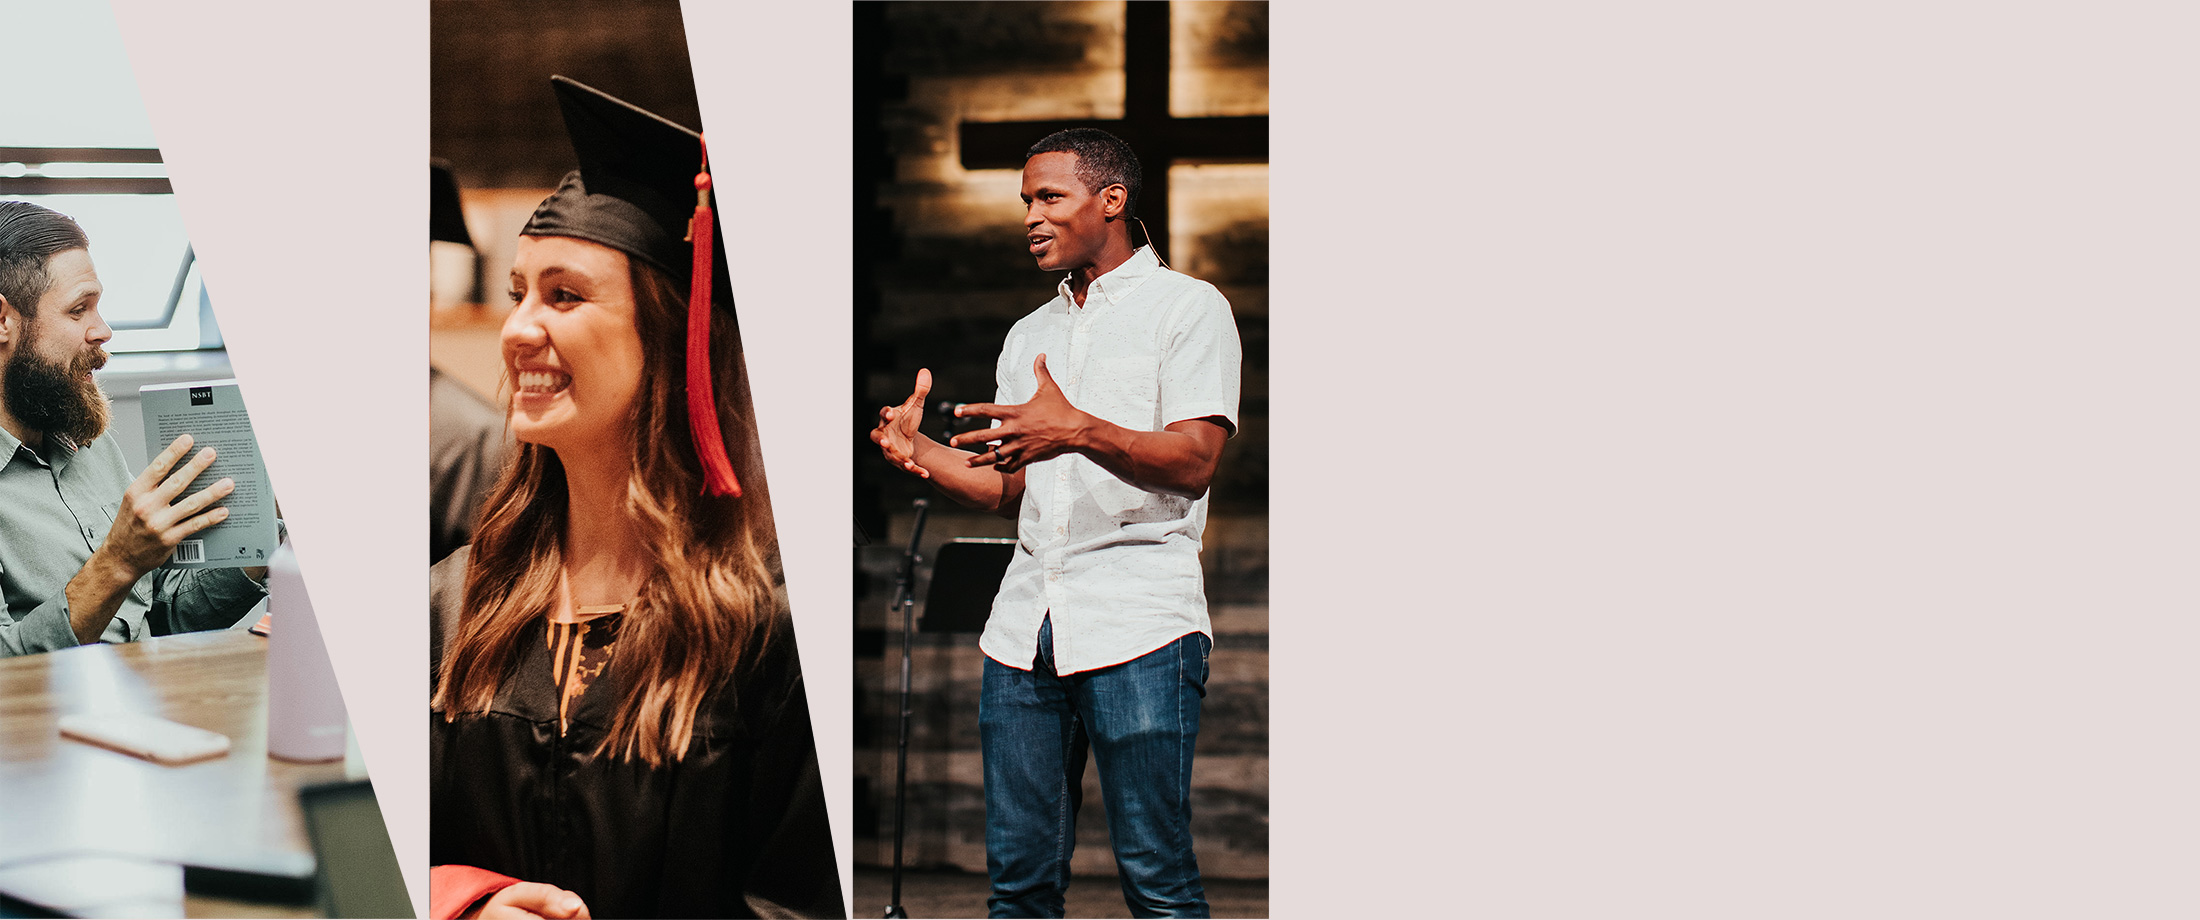 Images of transformation from student to graduate to ministry.